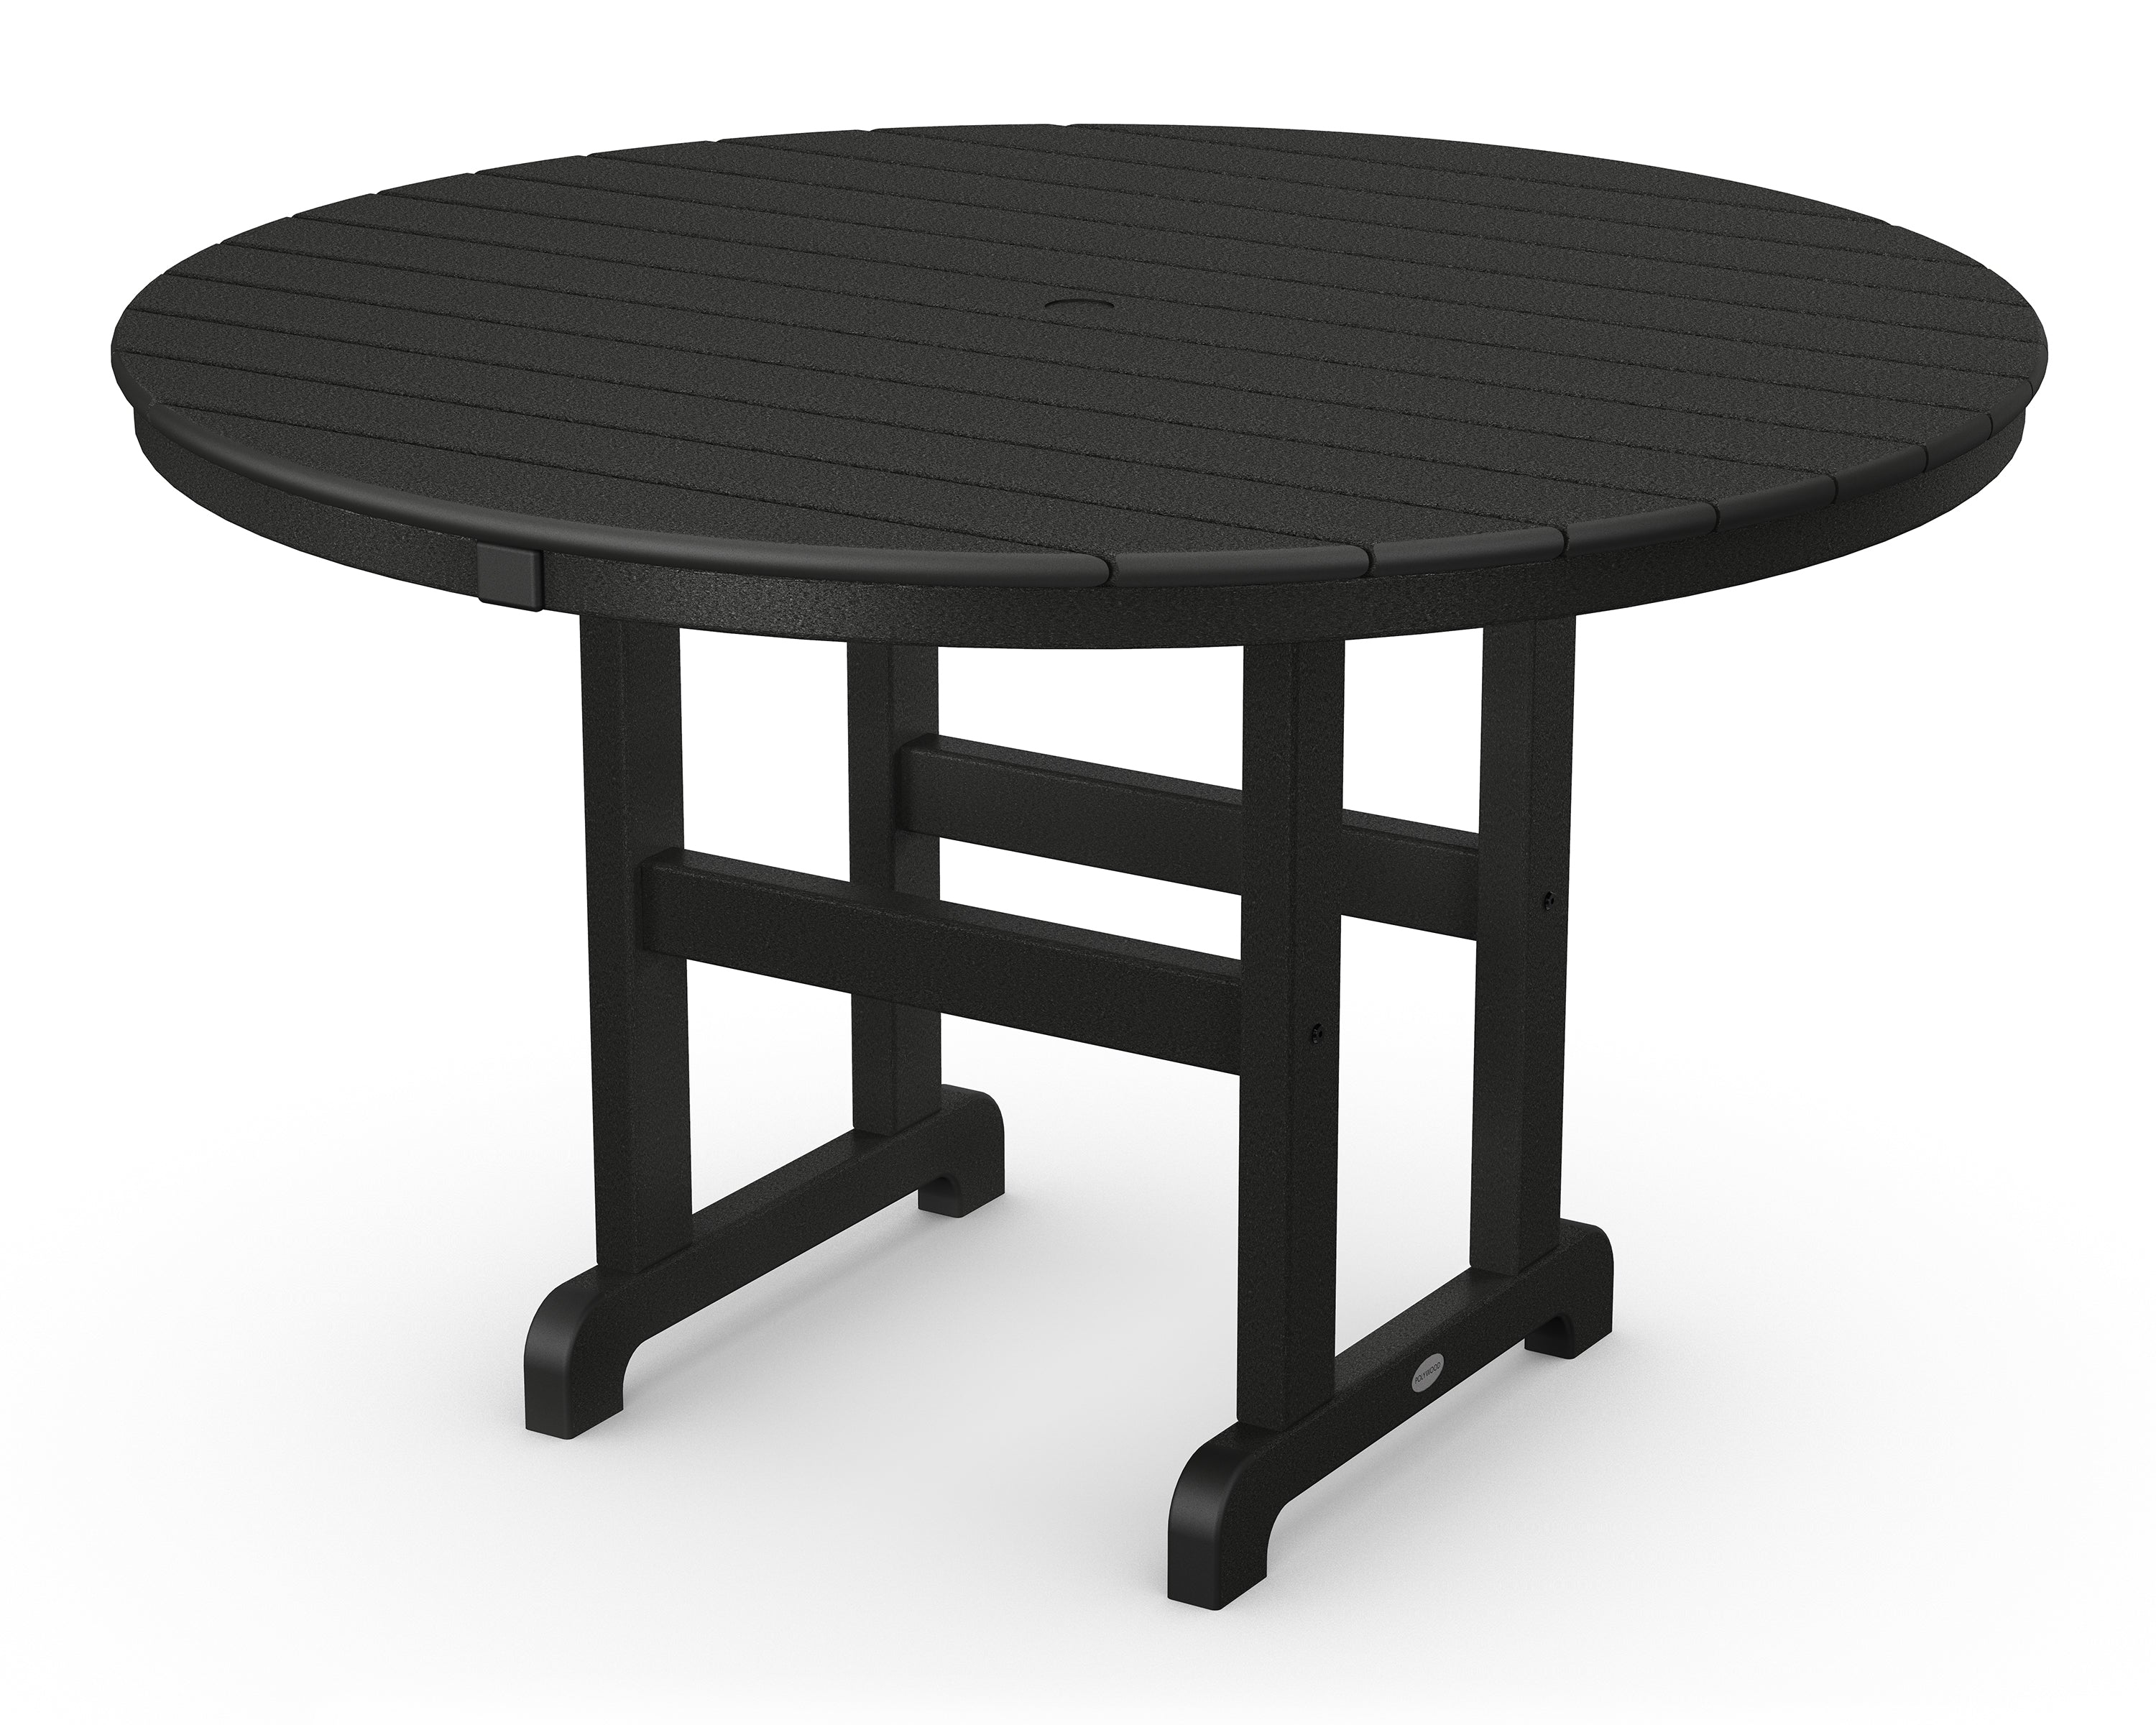 POLYWOOD 48 inch Round Farmhouse Dining Table Outdoor Tables Black 12039481